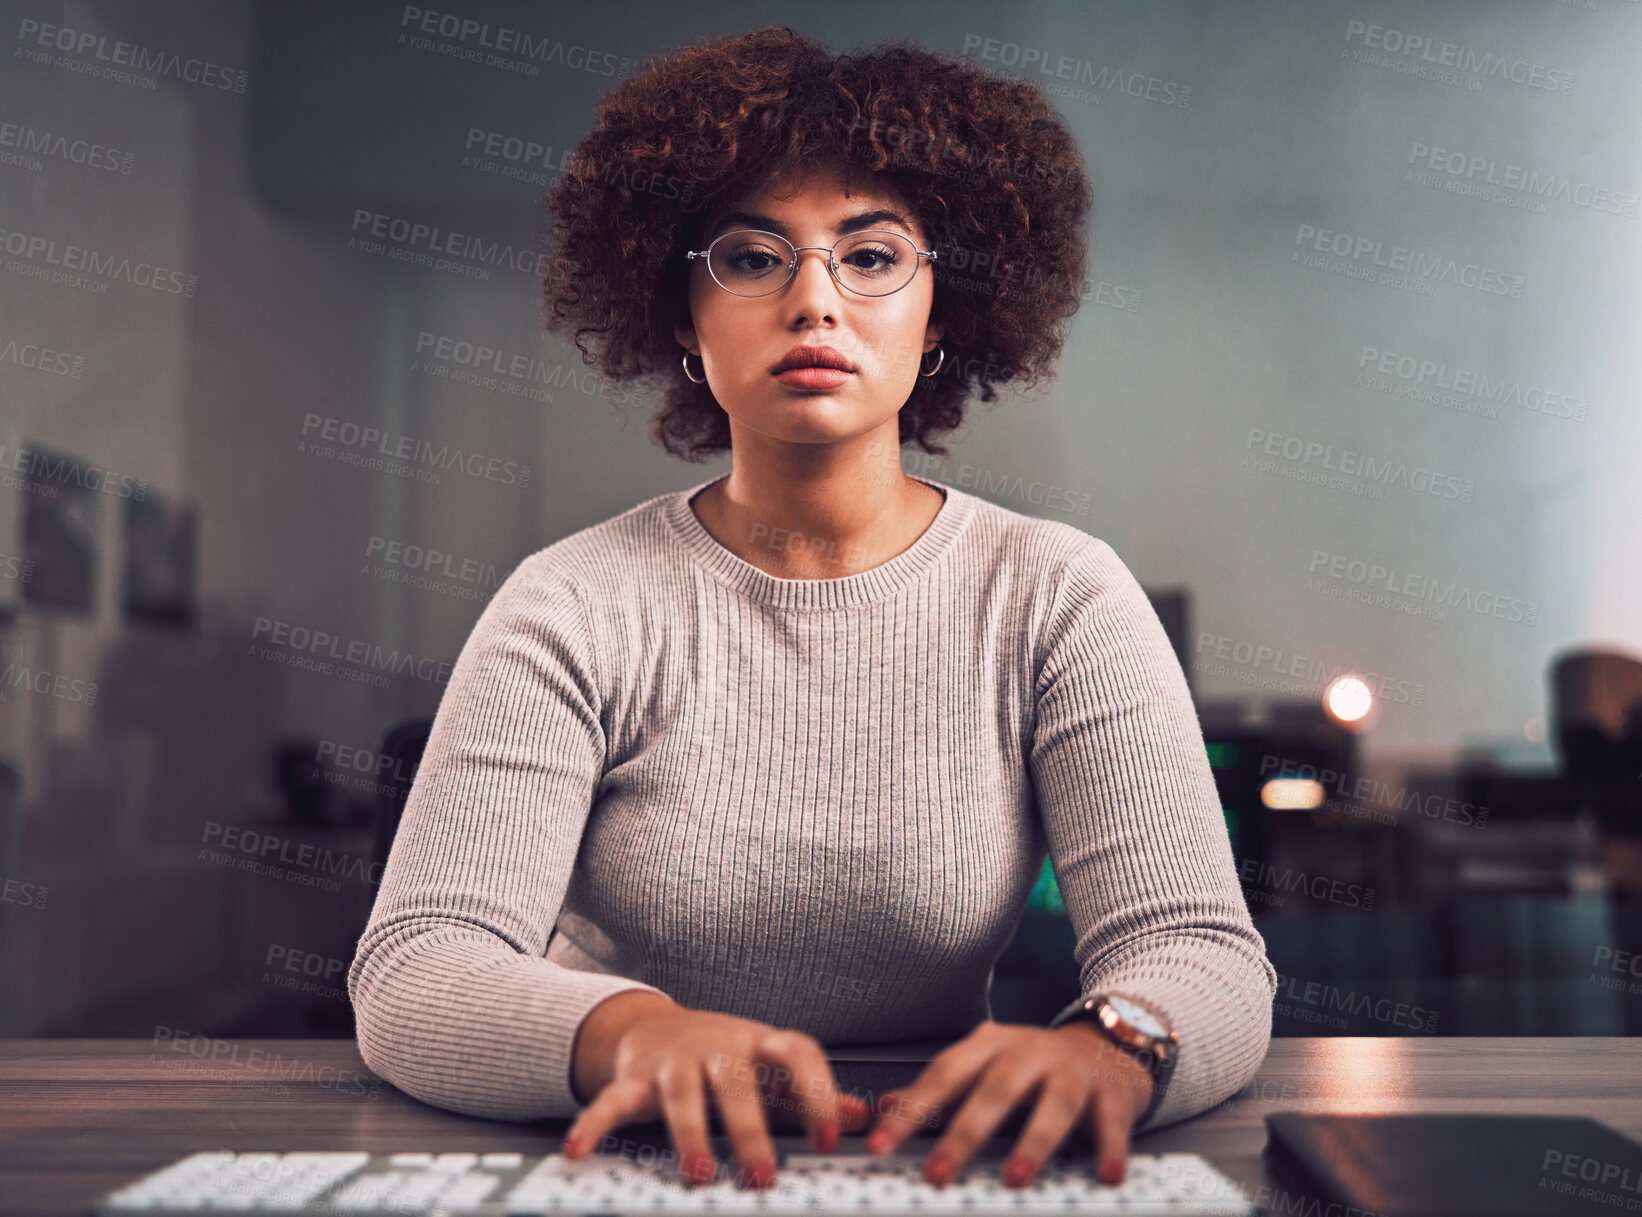 Buy stock photo Portrait, programmer keyboard and woman typing, research or programming online at night. Information technology, computer keypad and female employee or coder with glasses working on software project.